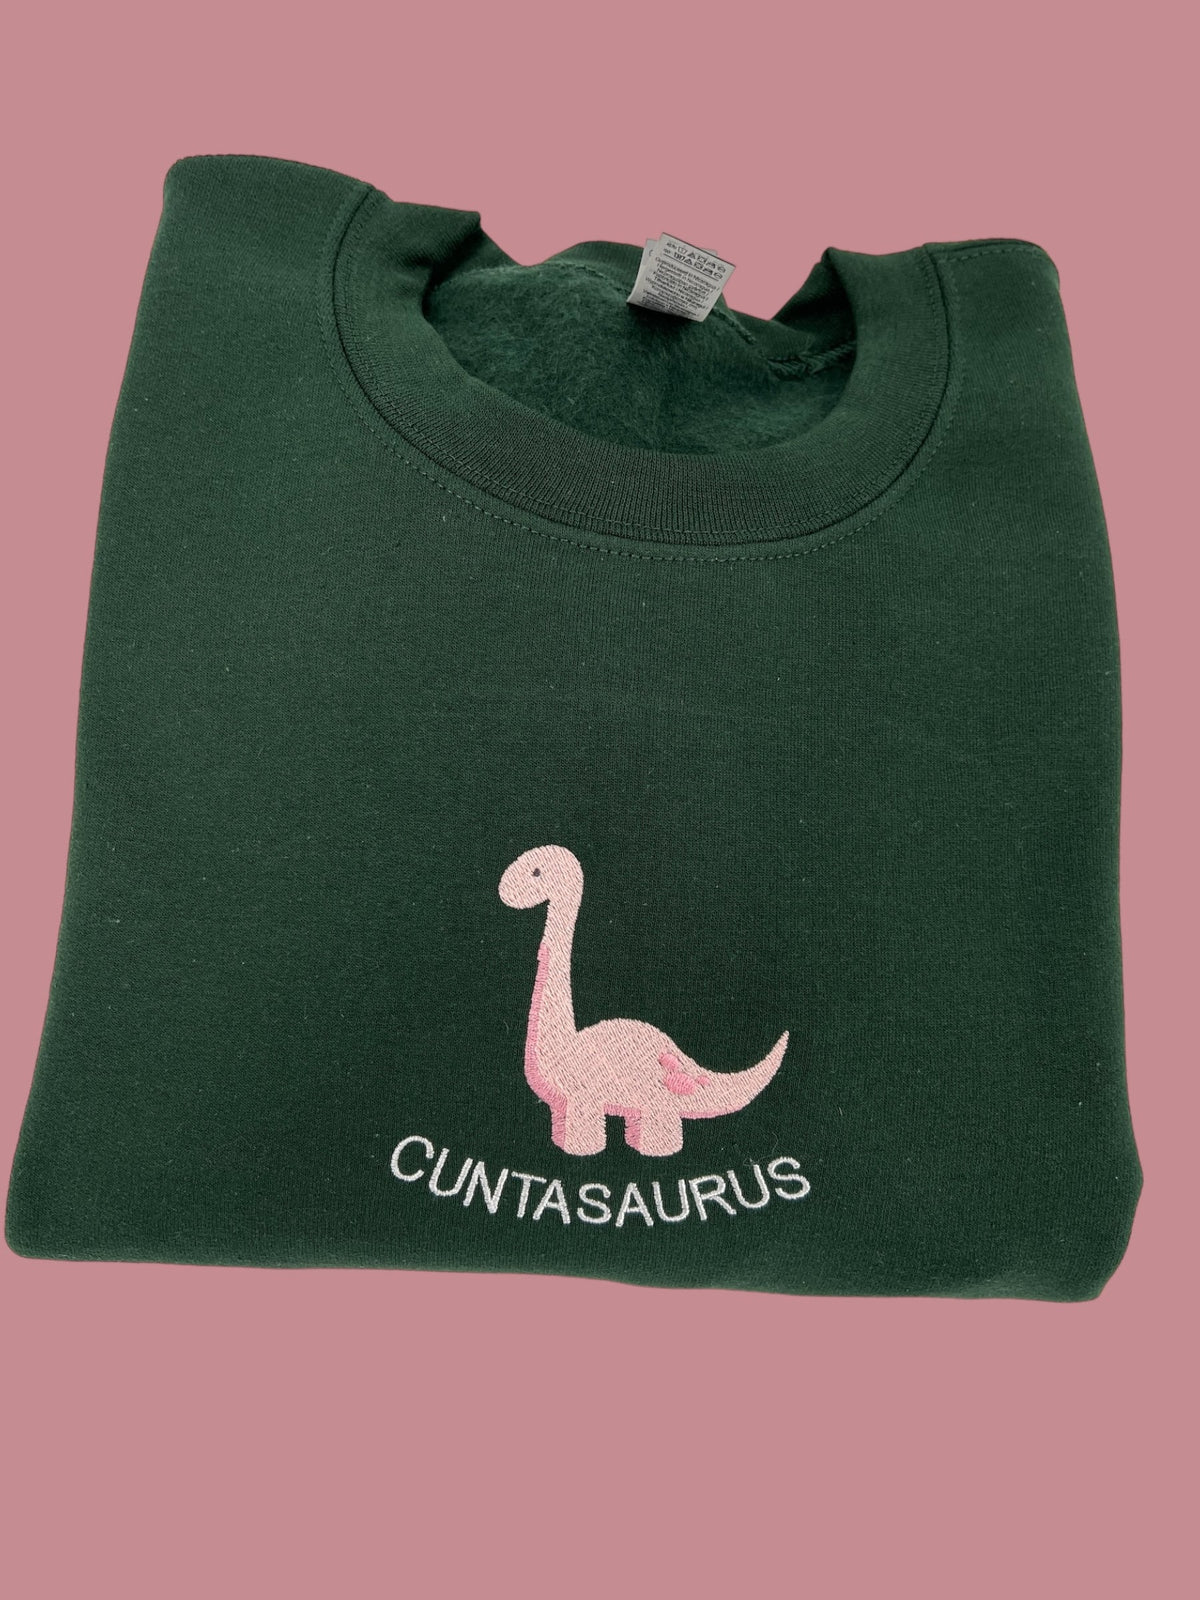 a green t - shirt with a pink dinosaur on it